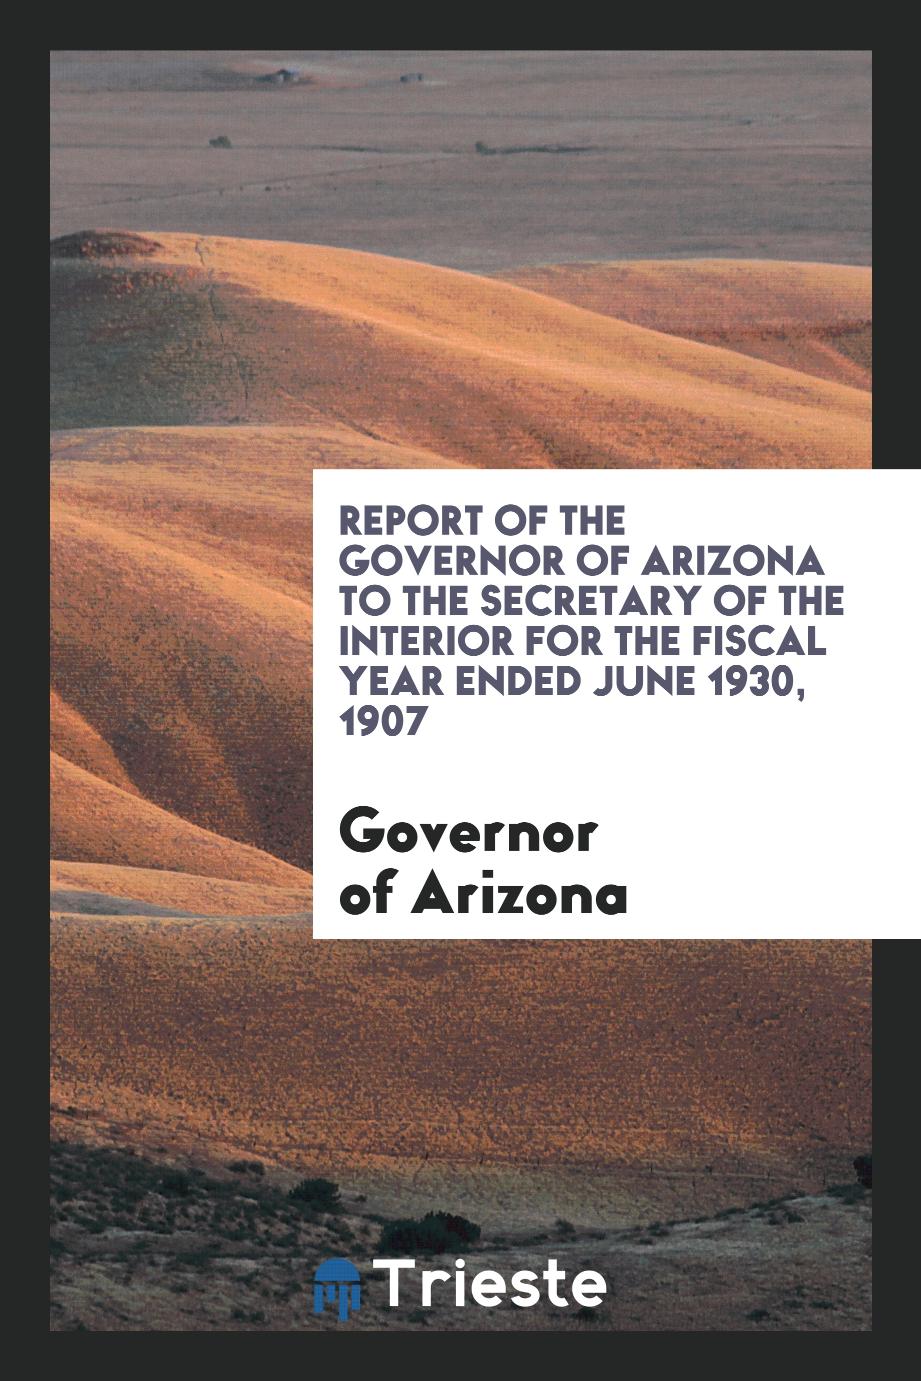 Report of the governor of Arizona to the secretary of the interior for the fiscal year ended June 1930, 1907